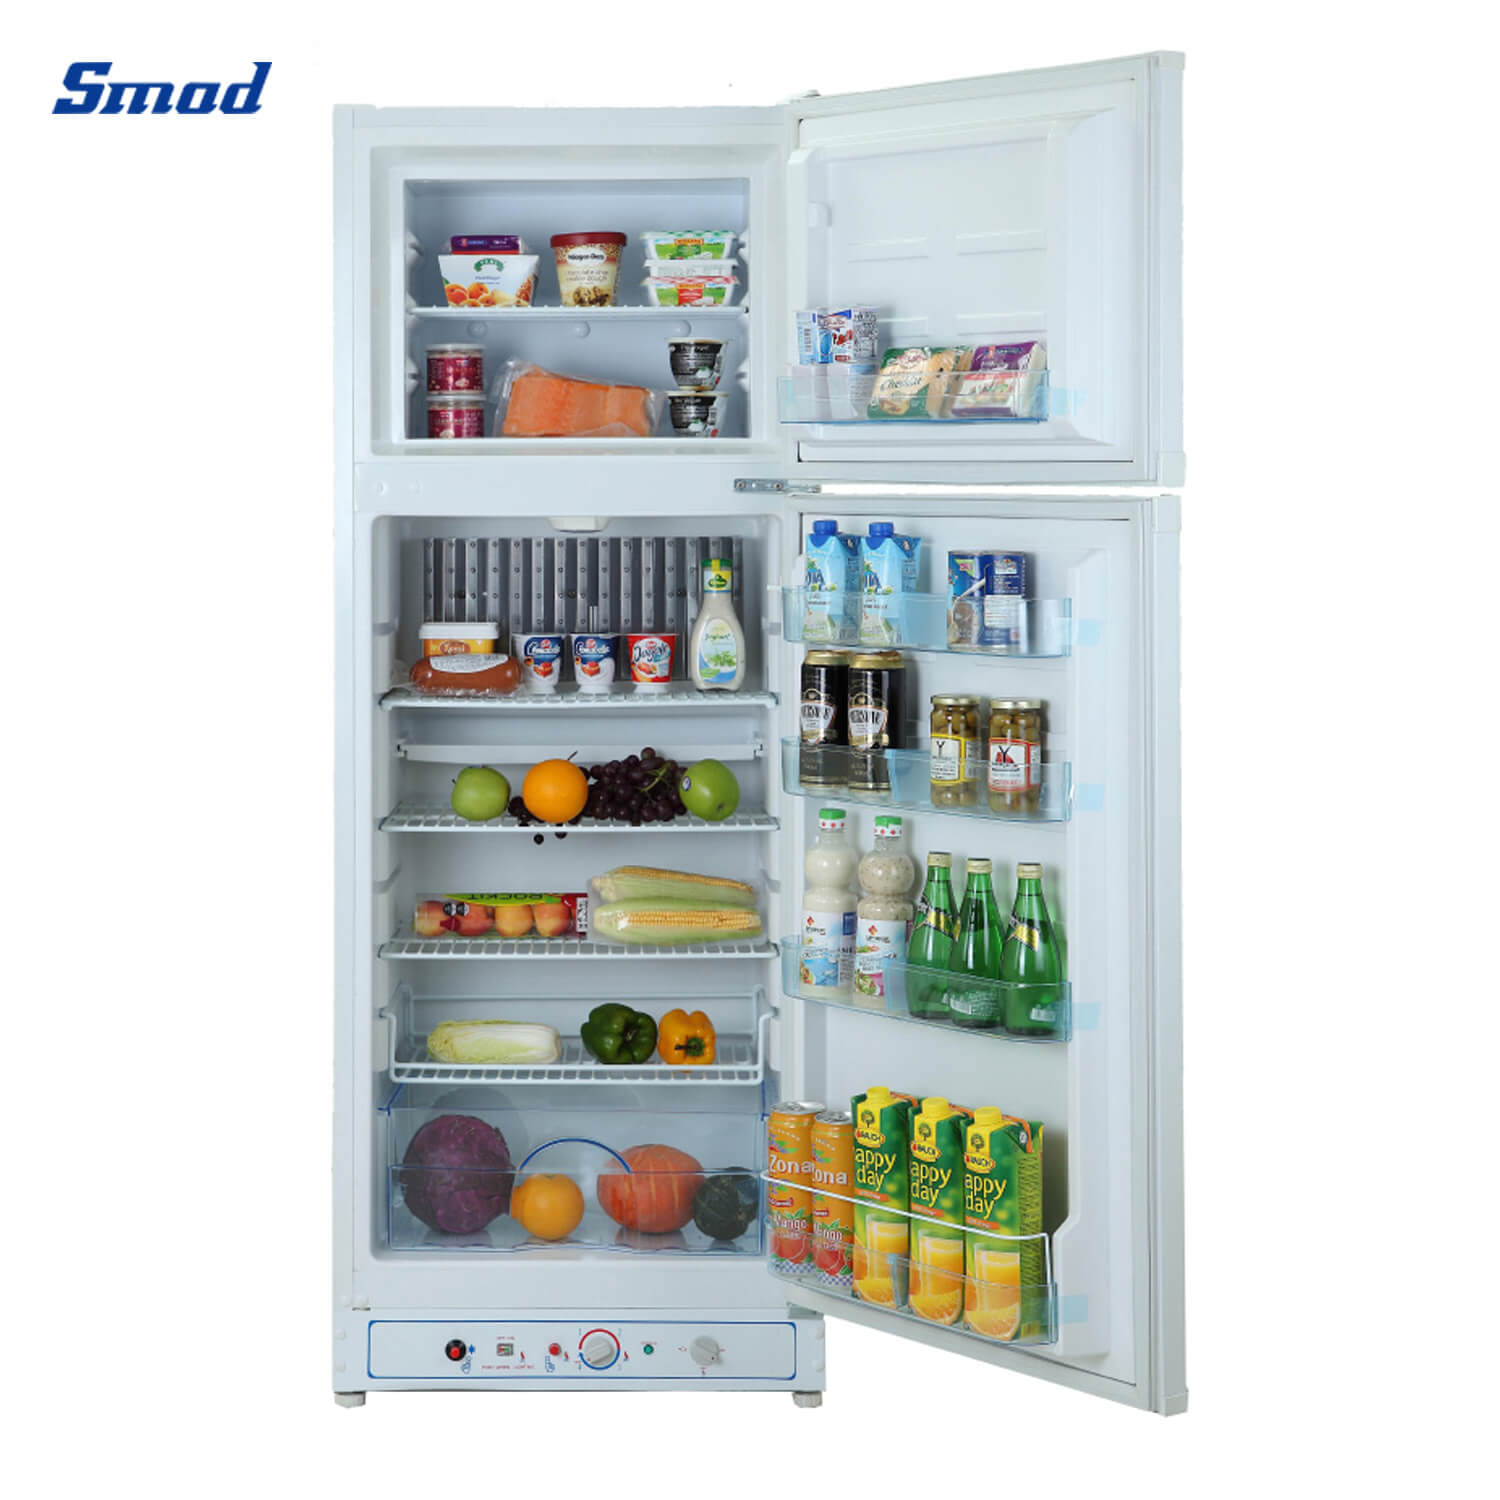 Smad 225L Gas / Electric Double Door Fridge Freezer with Compact Structure Design